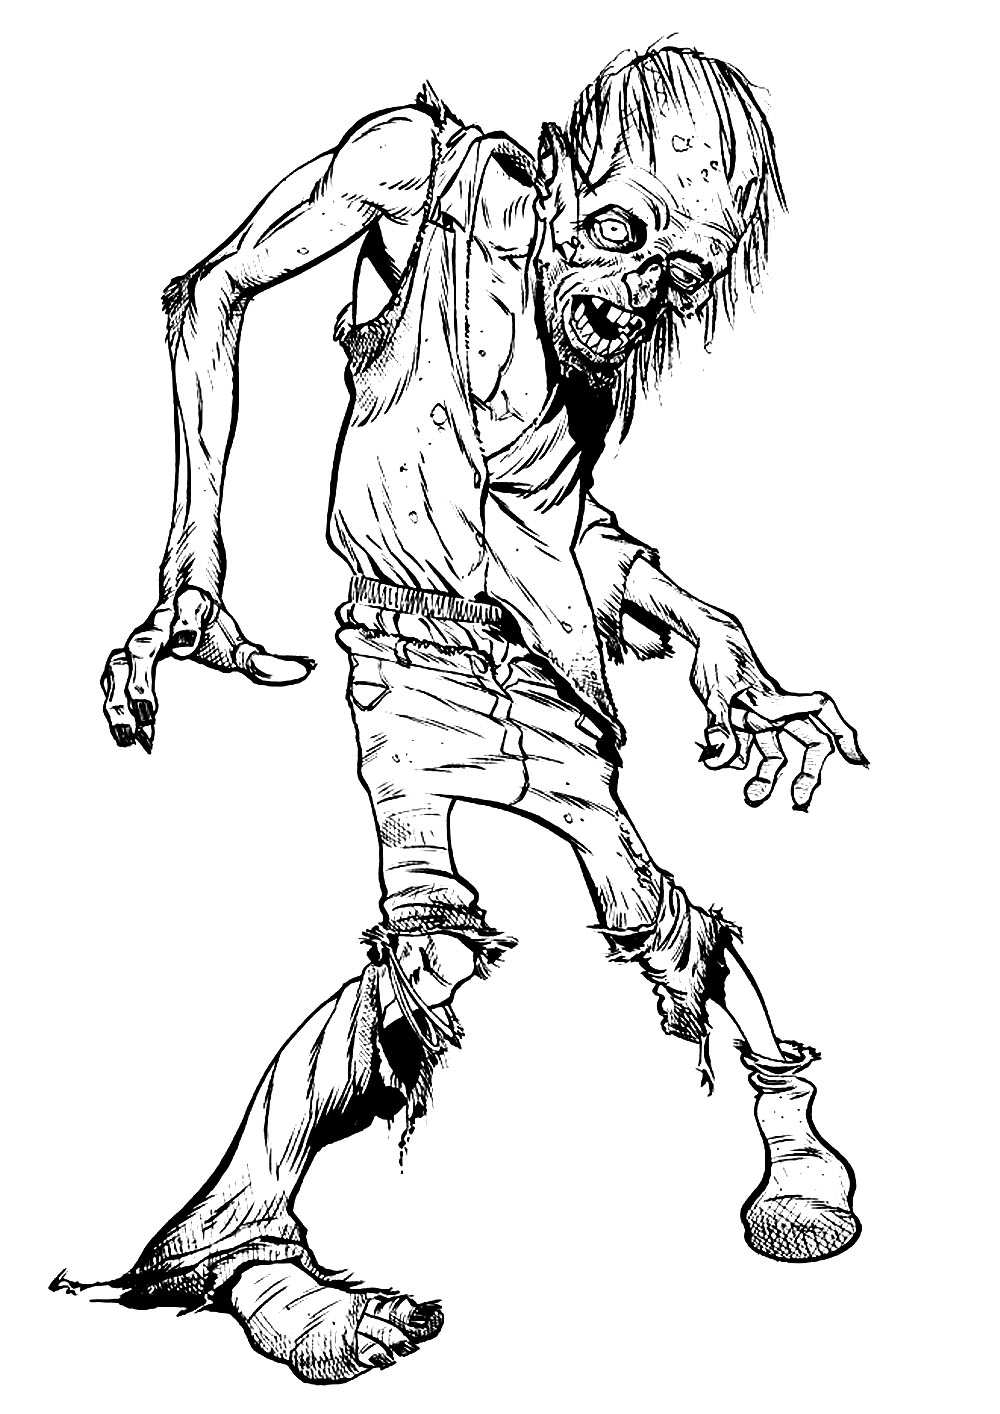 Scary Zombie walking right to you ! Color him before he transforms you into a Zombie !